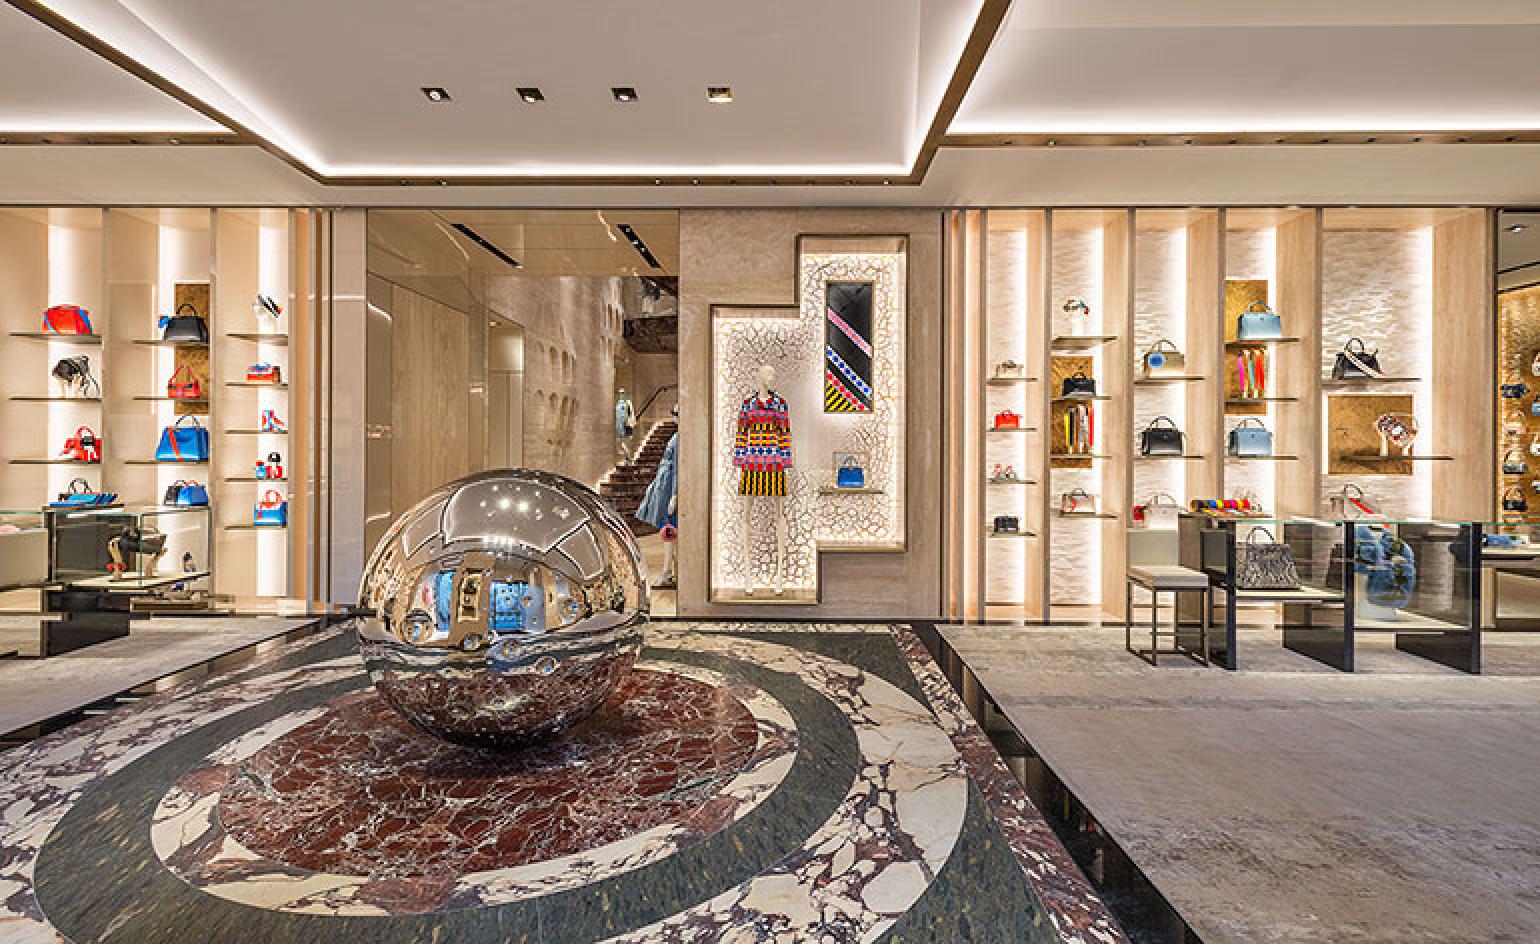 Fendi store interior with large reflective sphere in the center